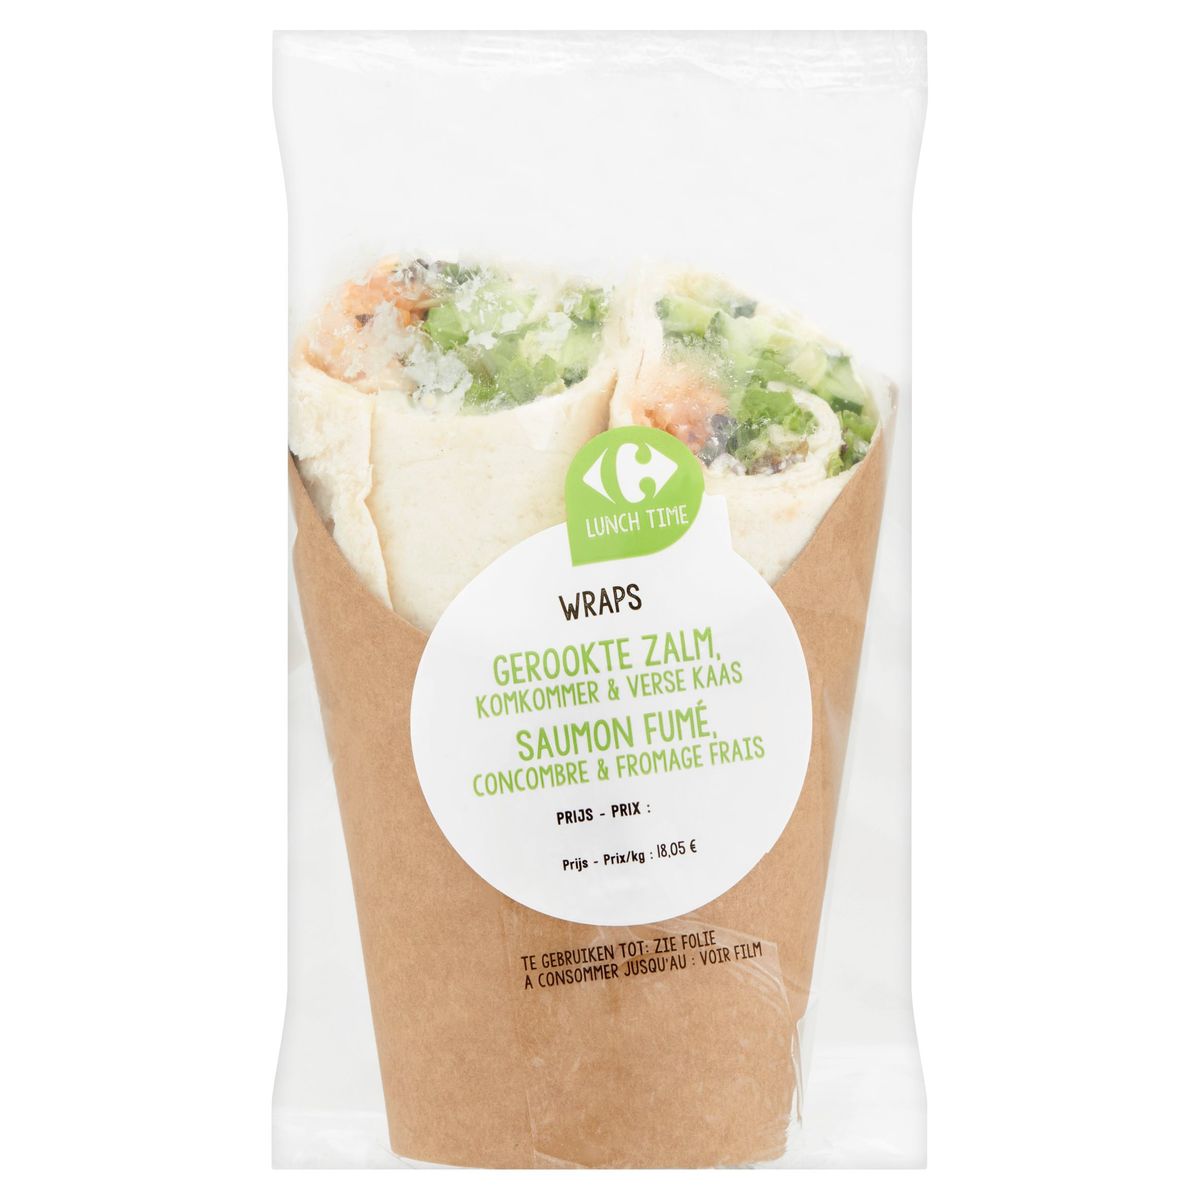 Carrefour Lunch Time Wraps Gerookte Zalm, Komkommer & Verse Kaas 210 g